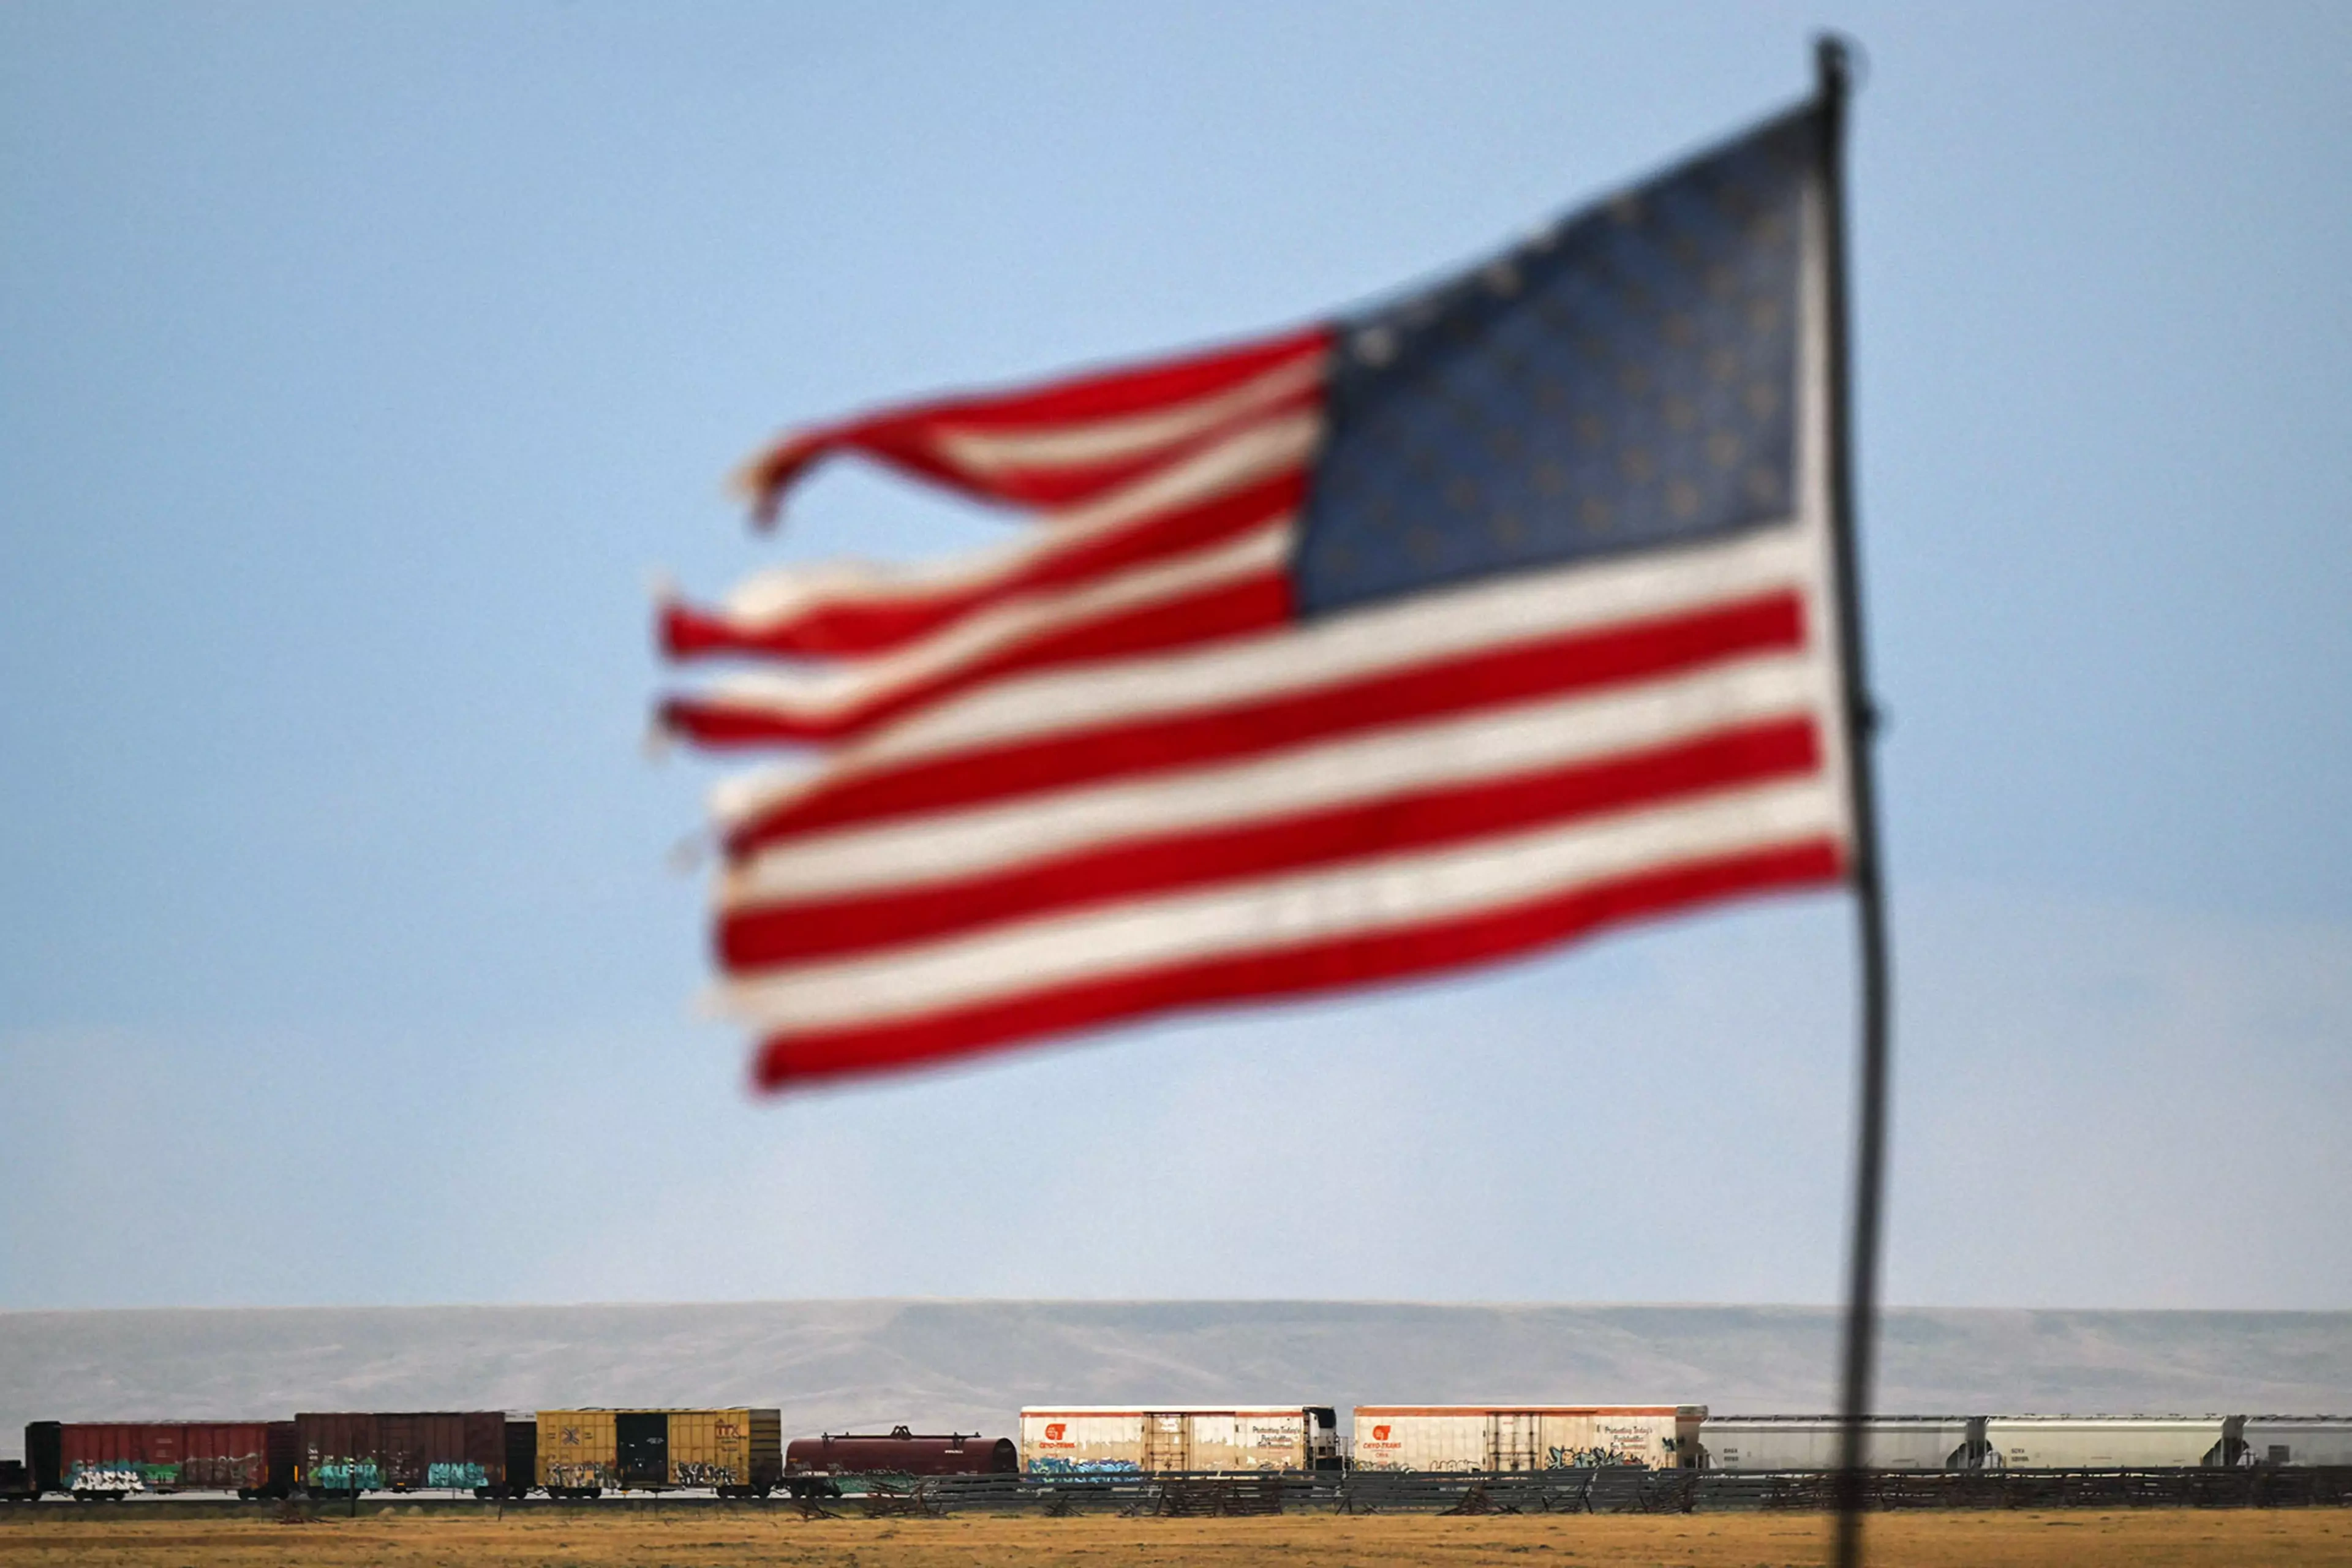 A U.S. flag waves above a freight train in Bosler, Wyoming.